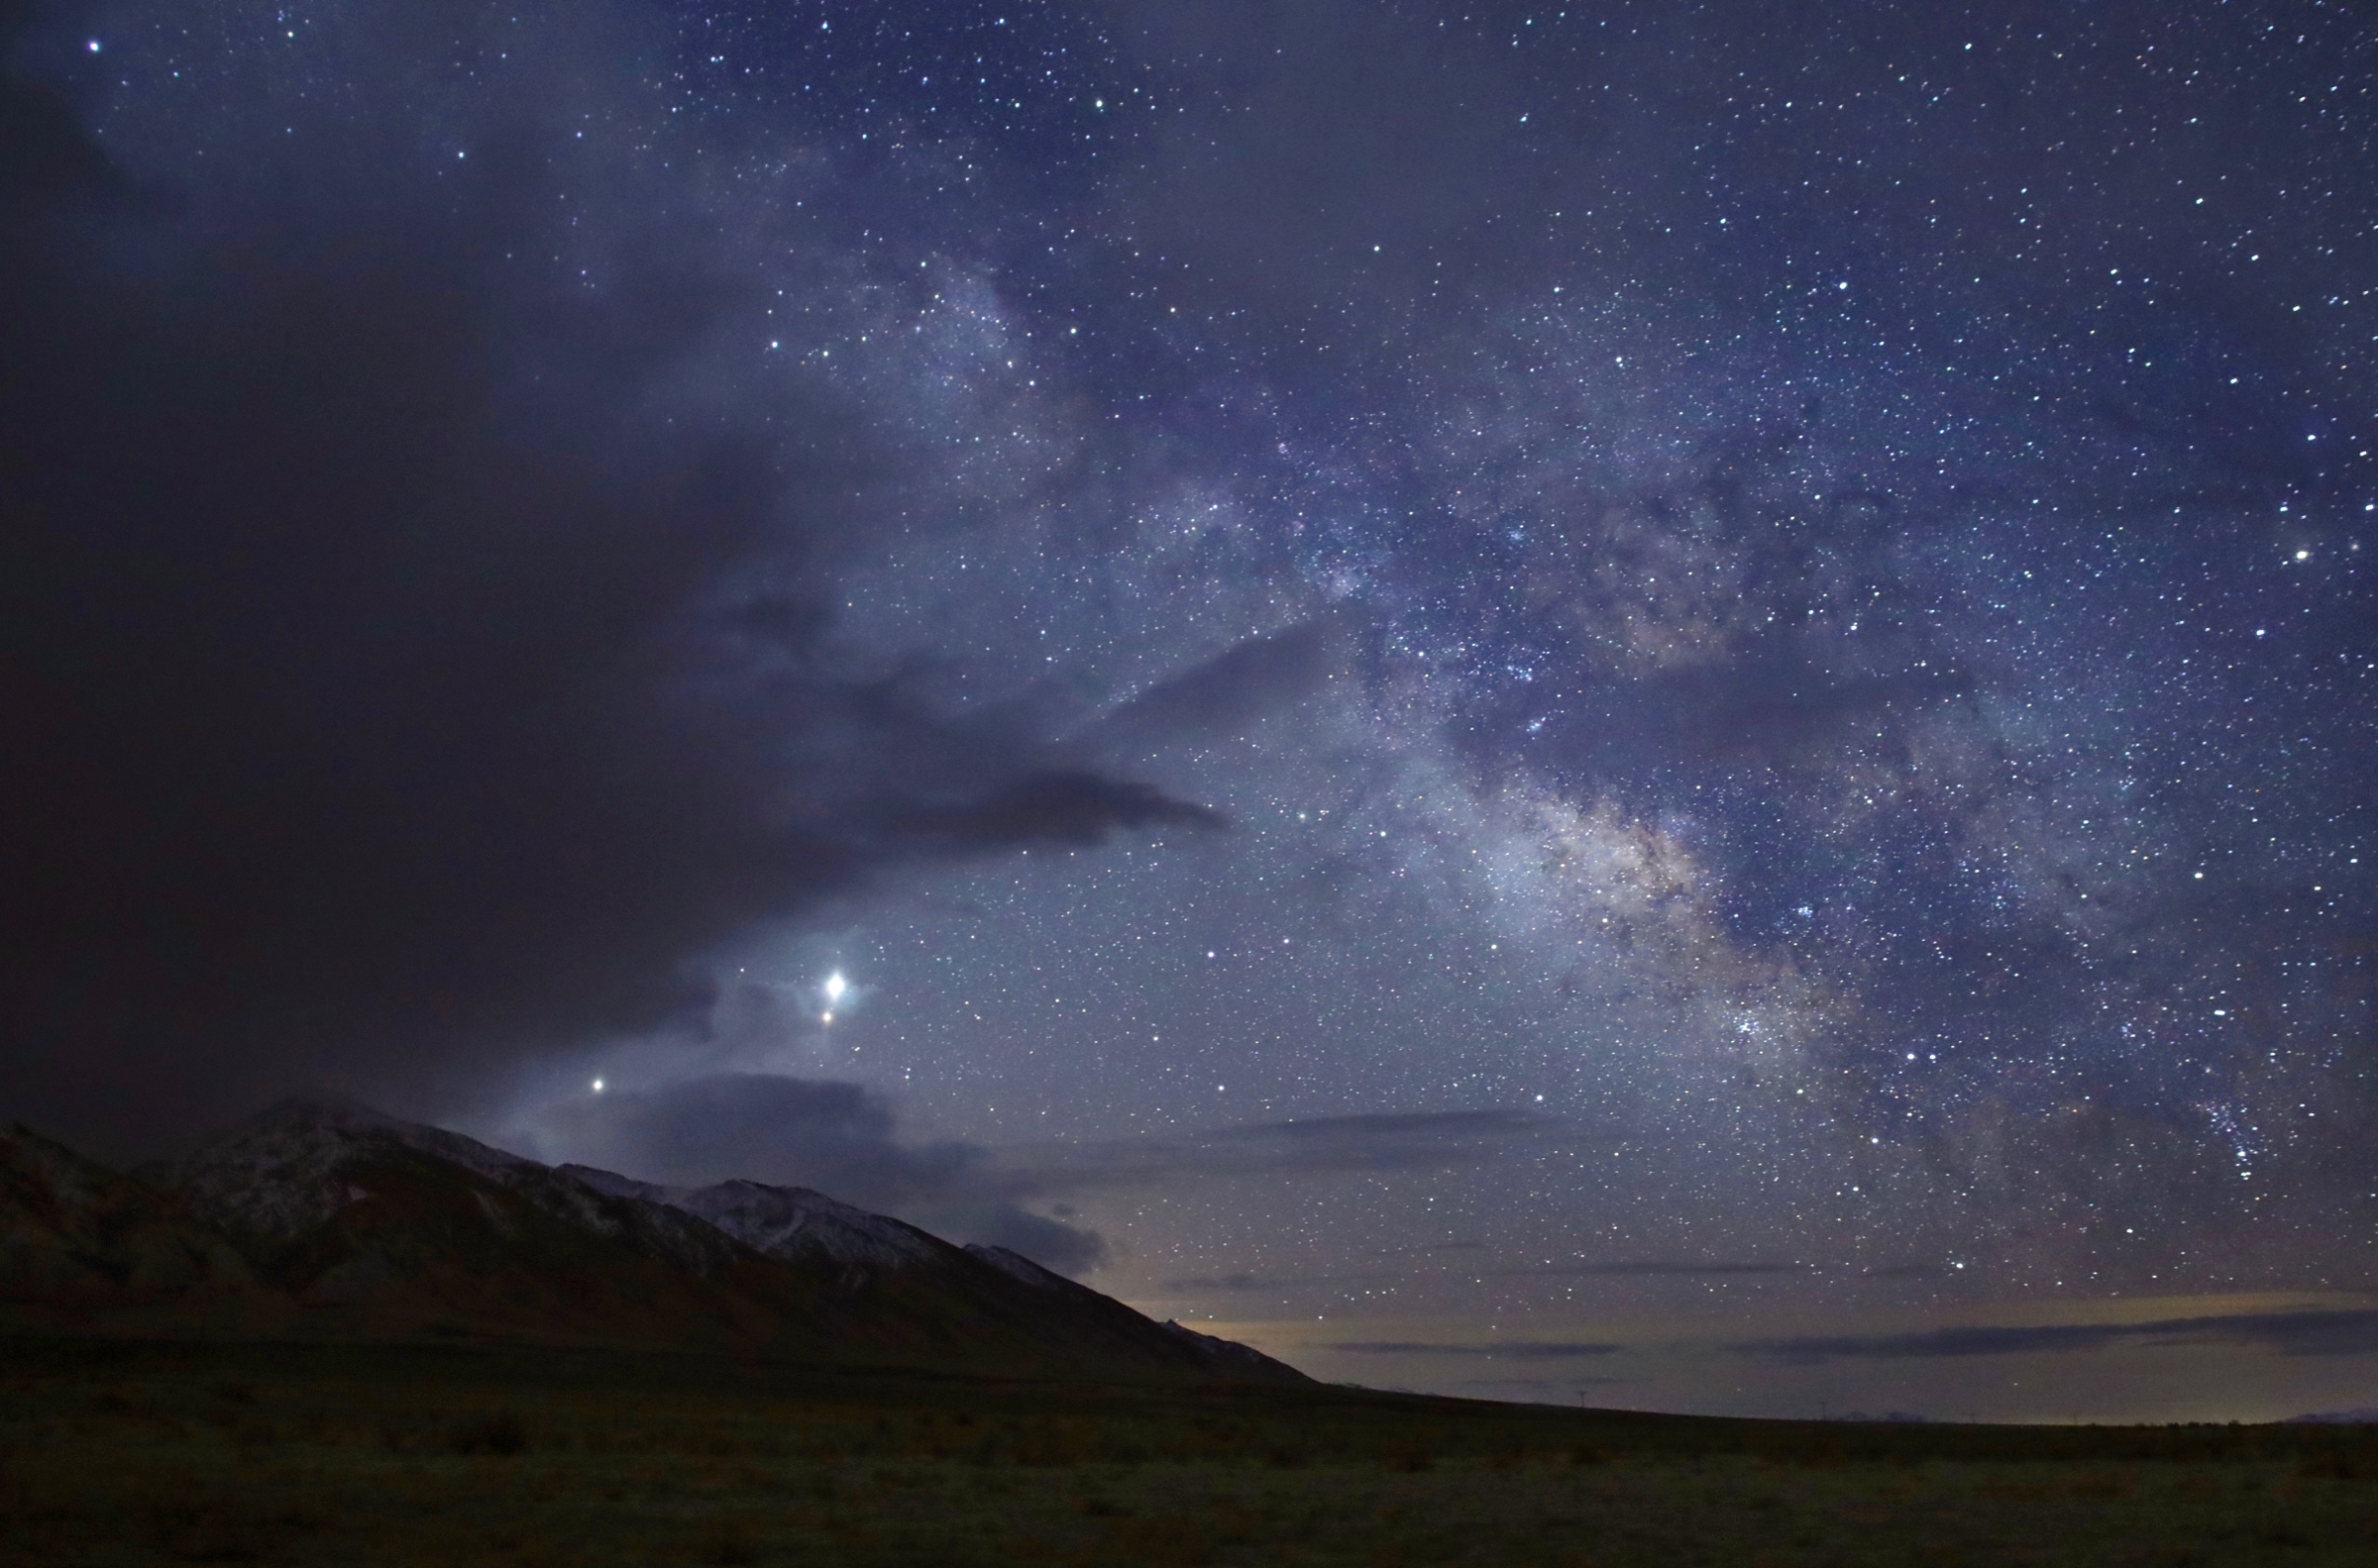 milky way rising above a mountain with three planets visible as bright stars